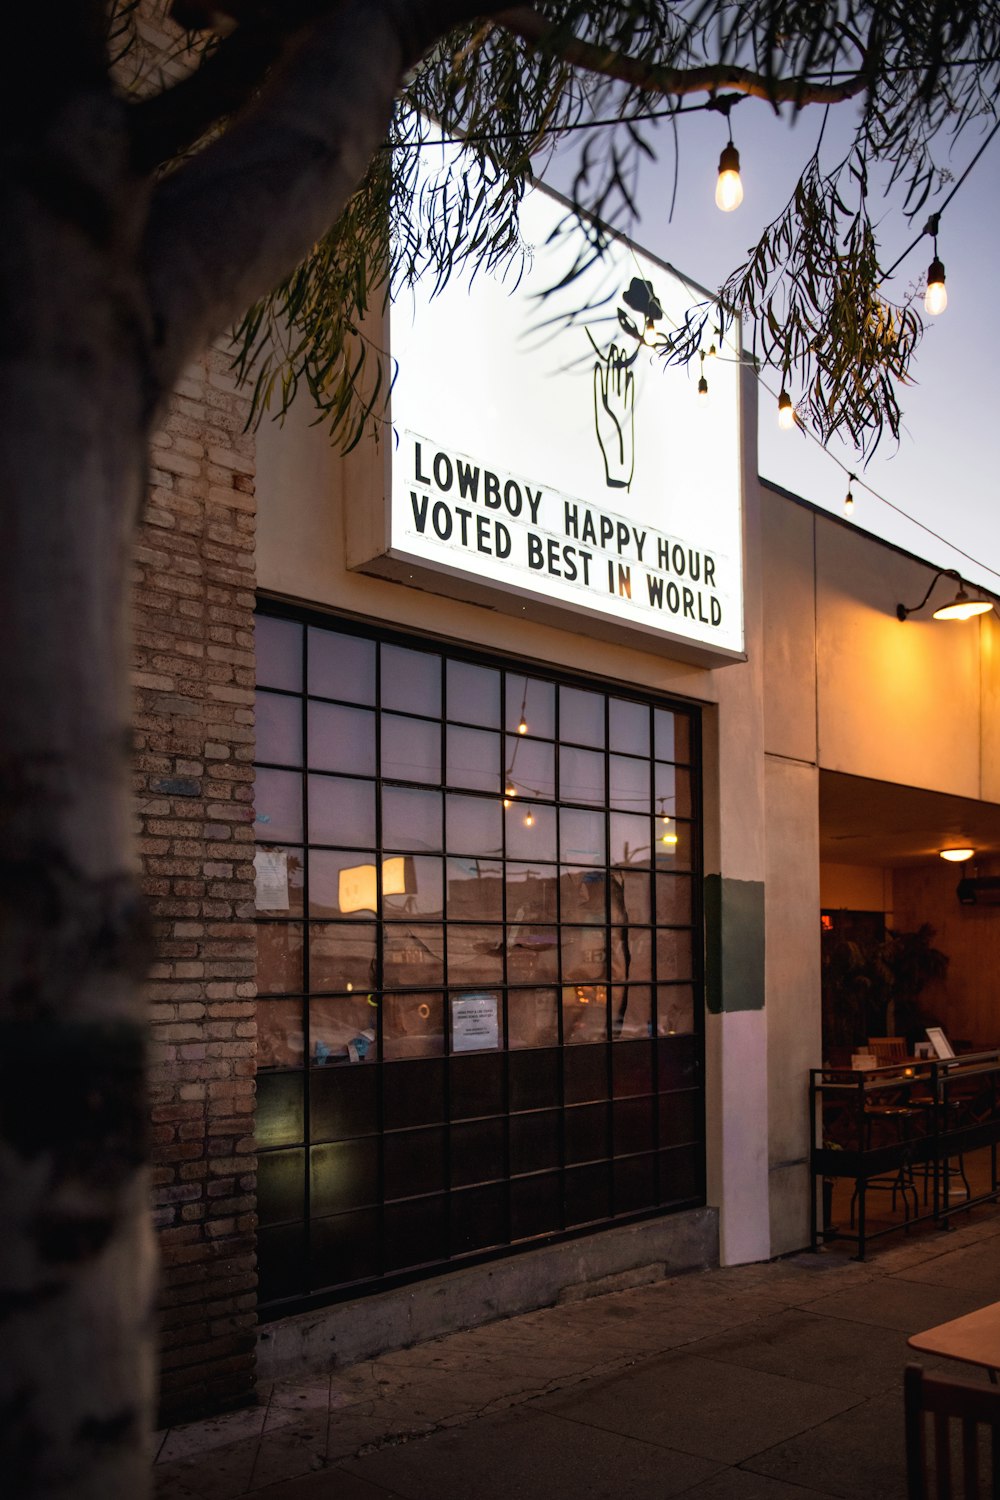 a building with a sign that says lowboy happy hour voting best in world